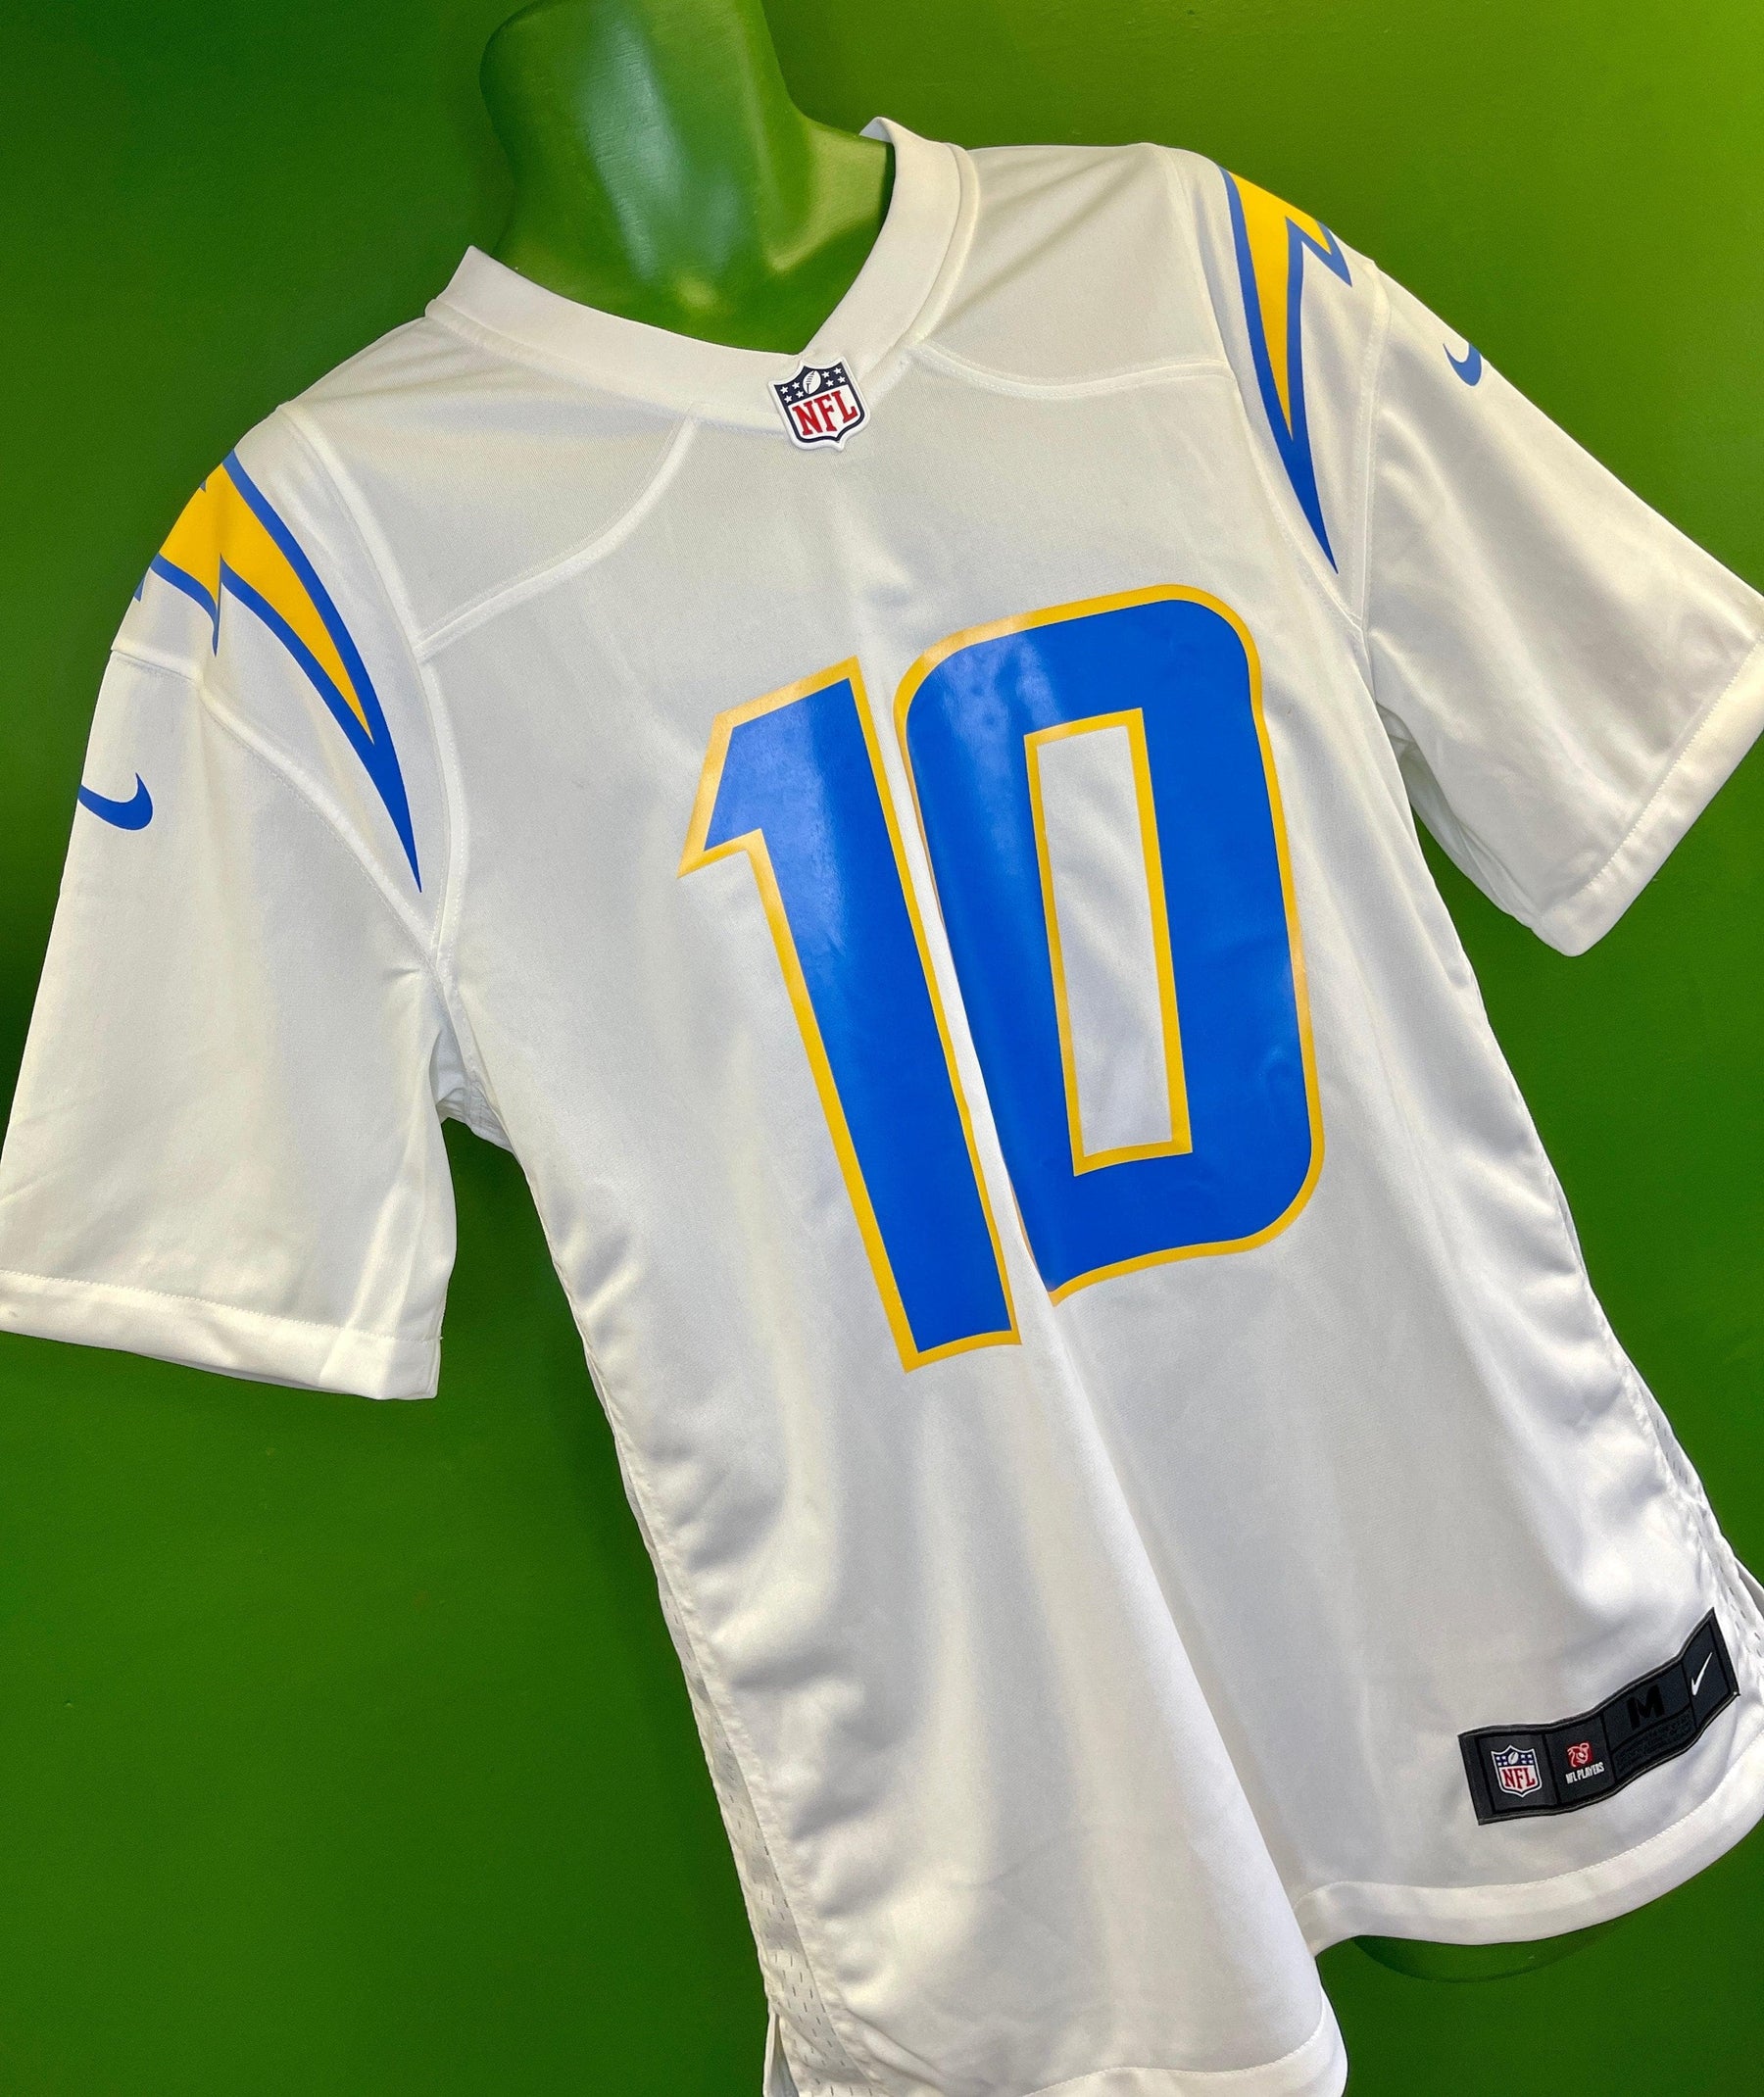 NFL Los Angeles Chargers Justin Herbert #10 Game Jersey Men's Medium NWT